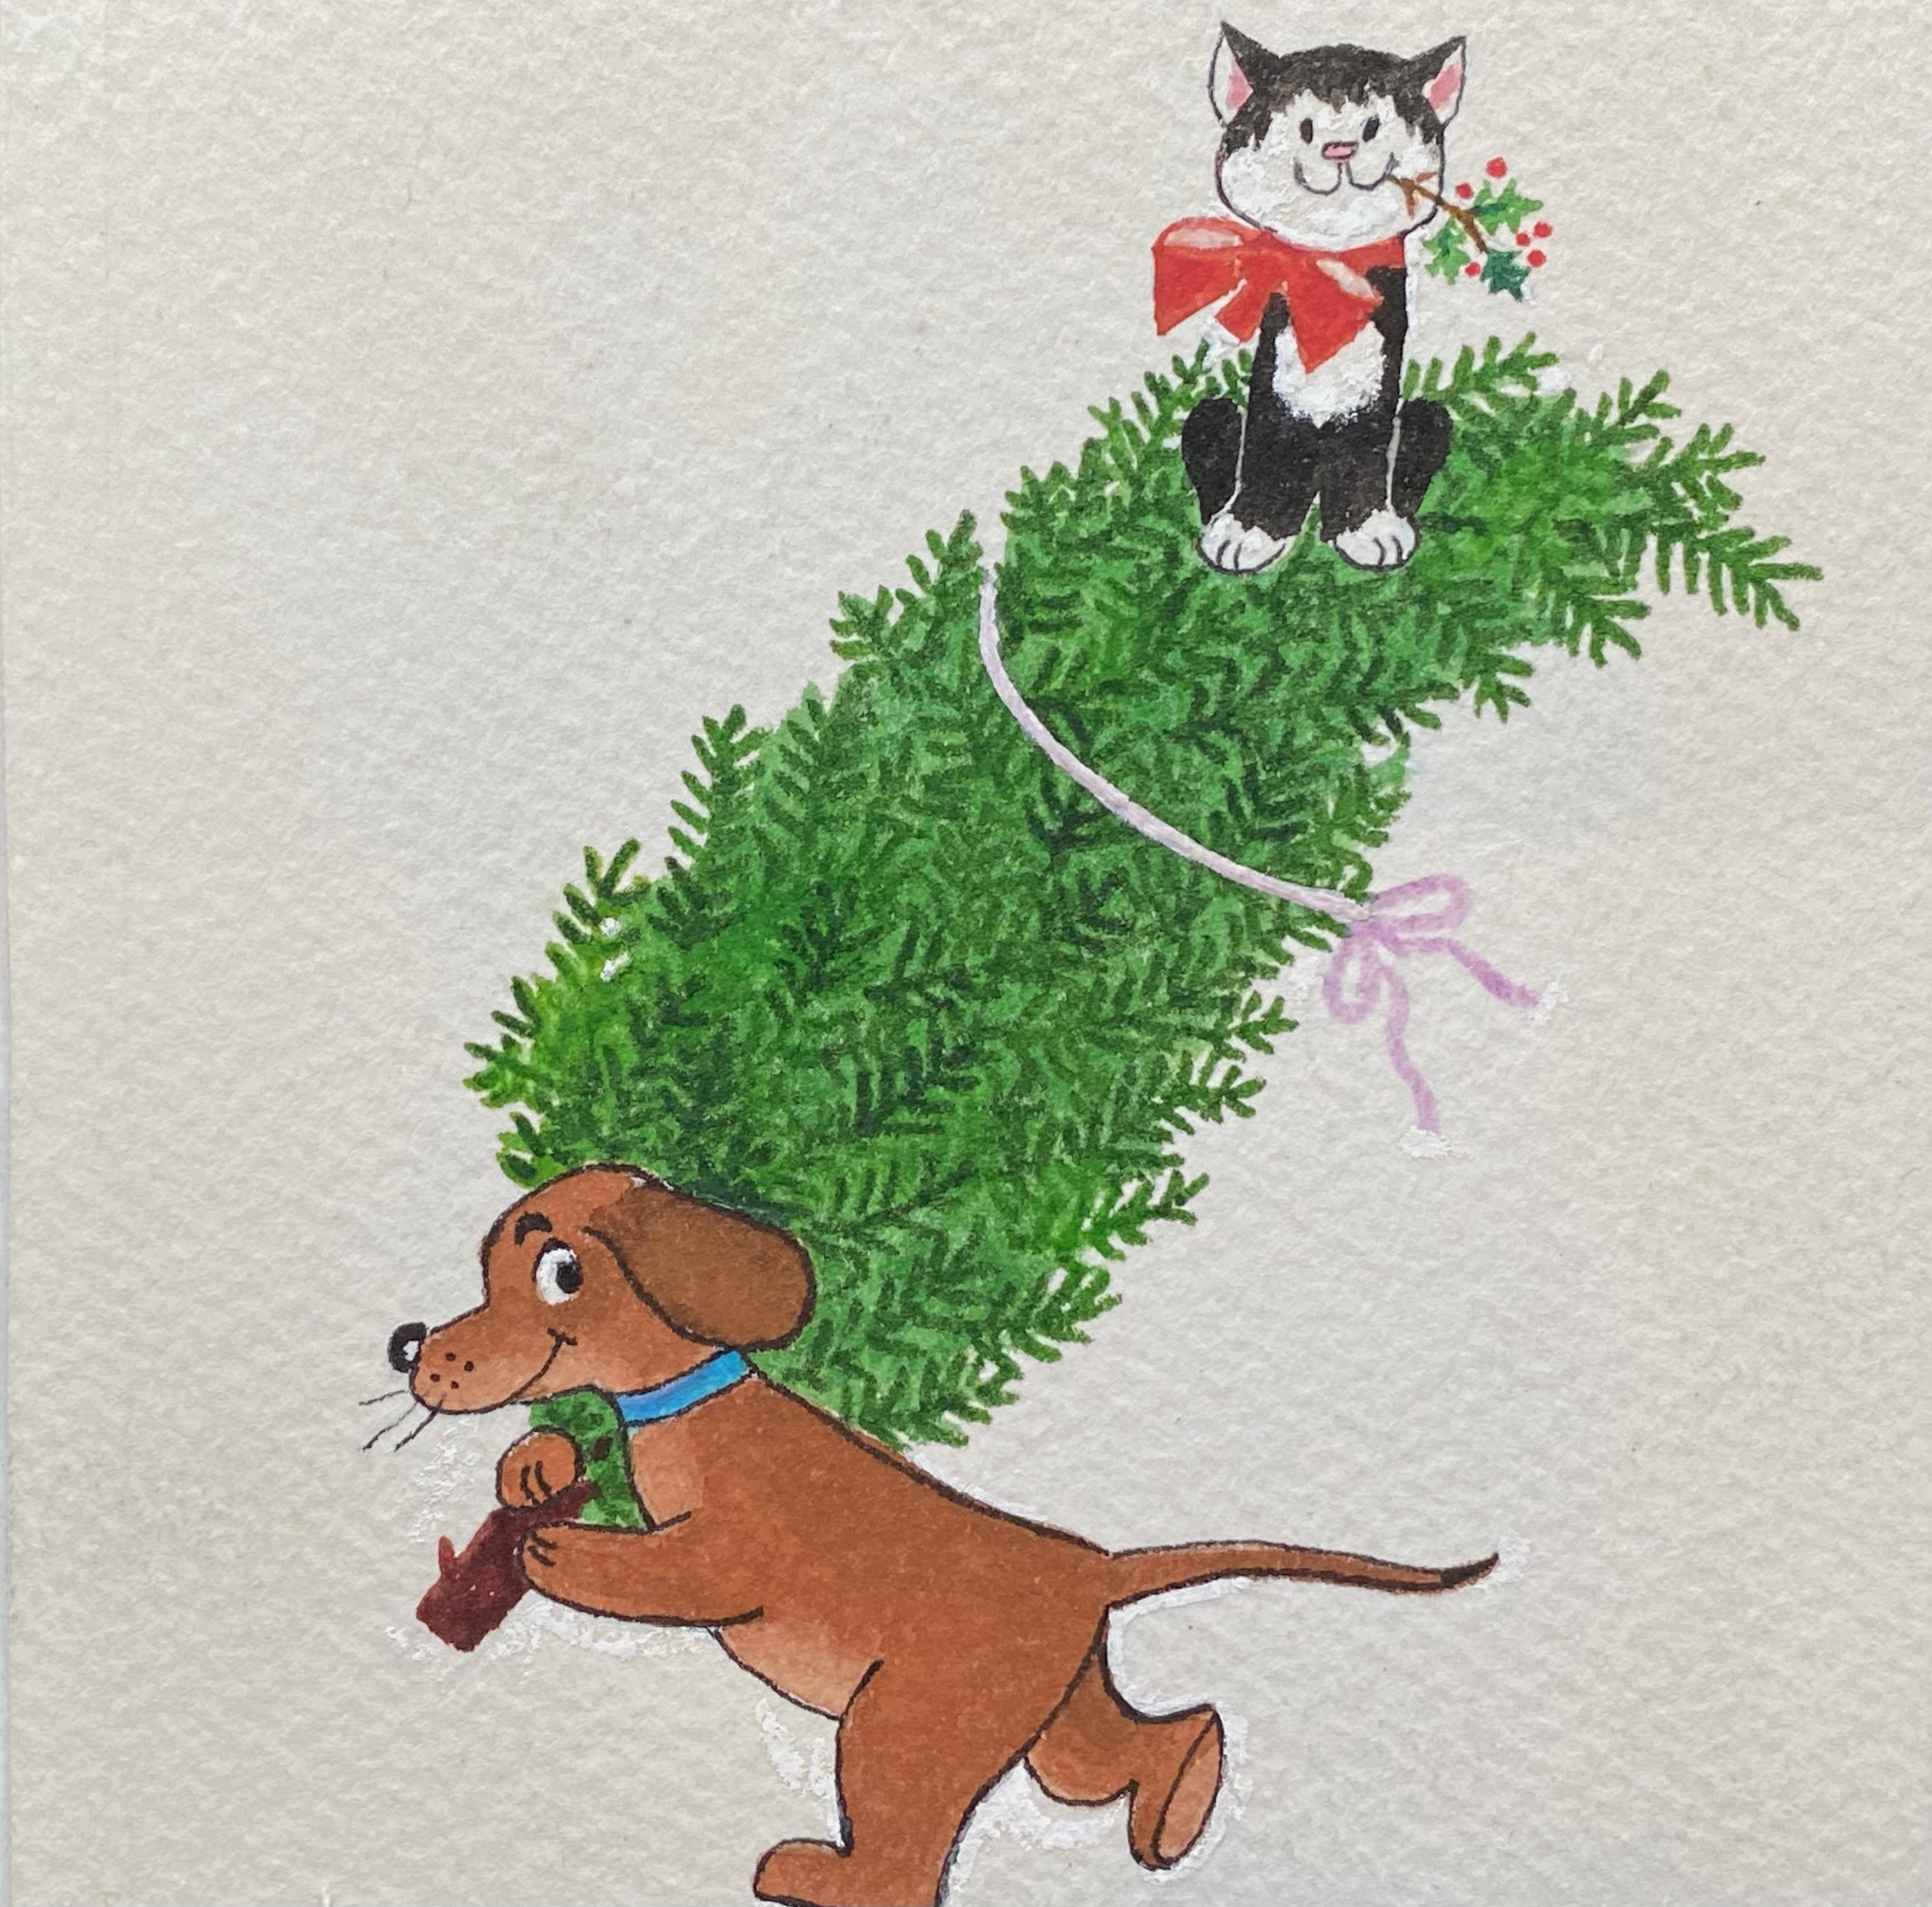 “Puppy with Christmas Tree & Kitty” - Other Art Style Art by Unknown